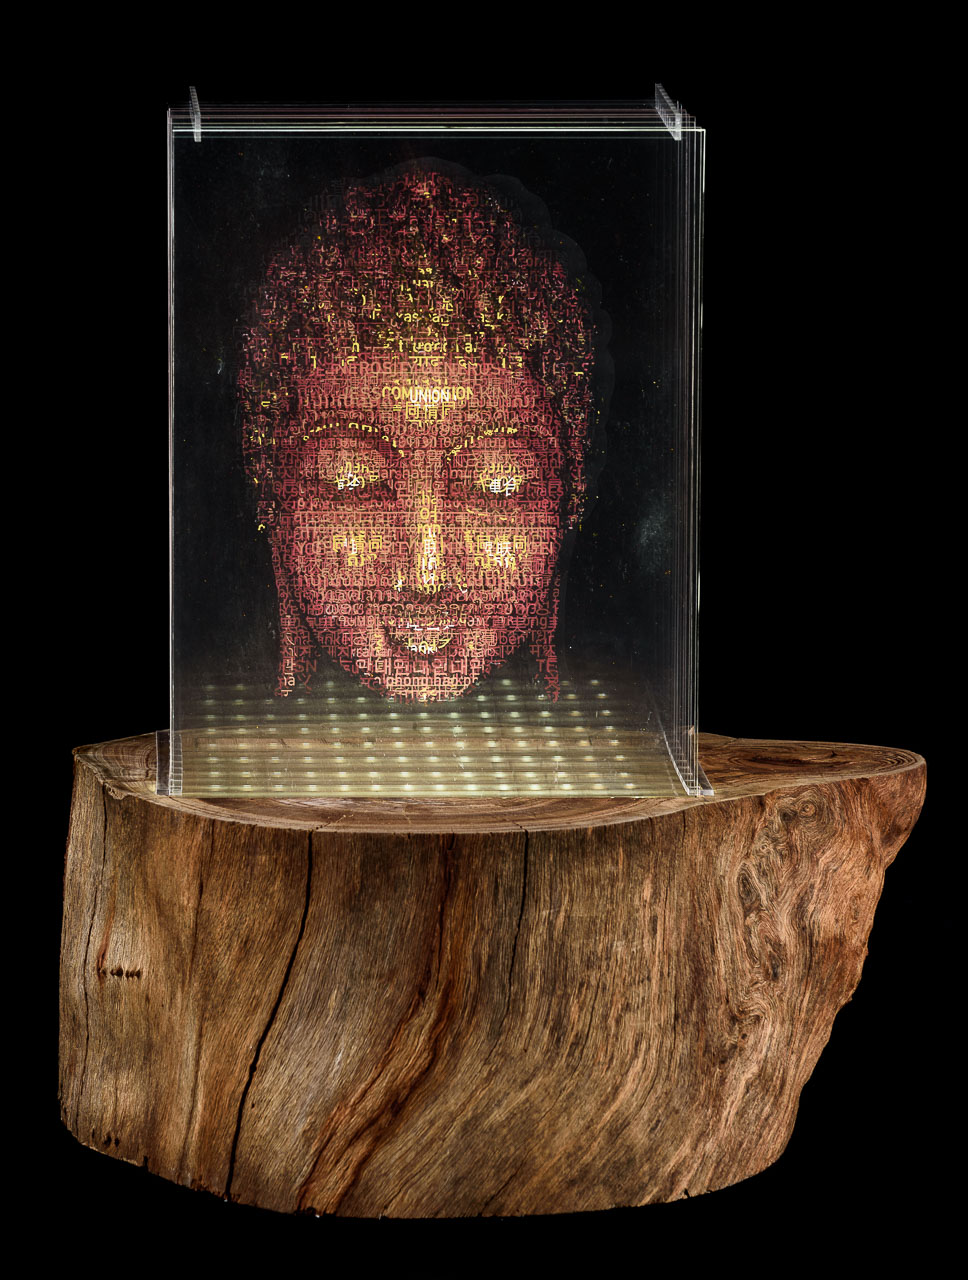 An image of Buddha made of eight layered perspex sheets sitting on top of a segment of tree trunk.